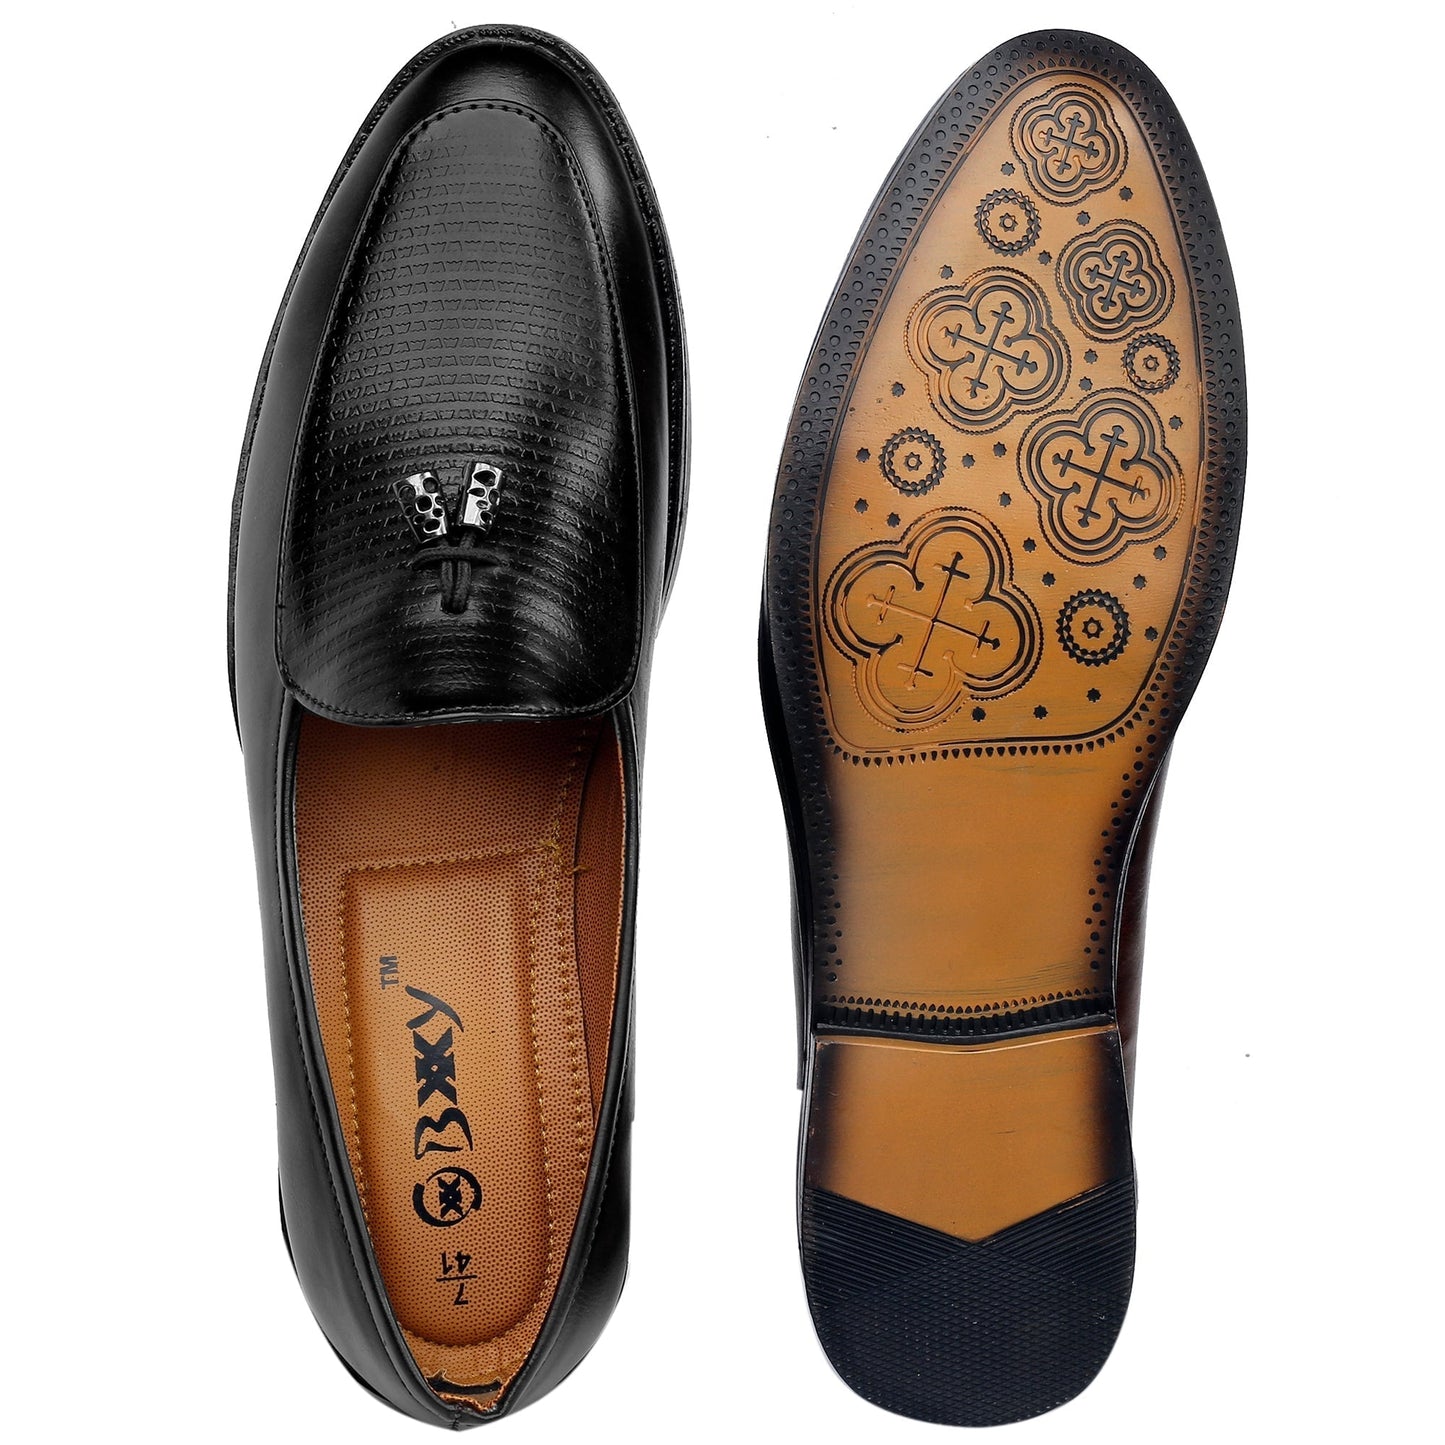 Bxxy's Faux Leather Casual Moccasins Slip-ons